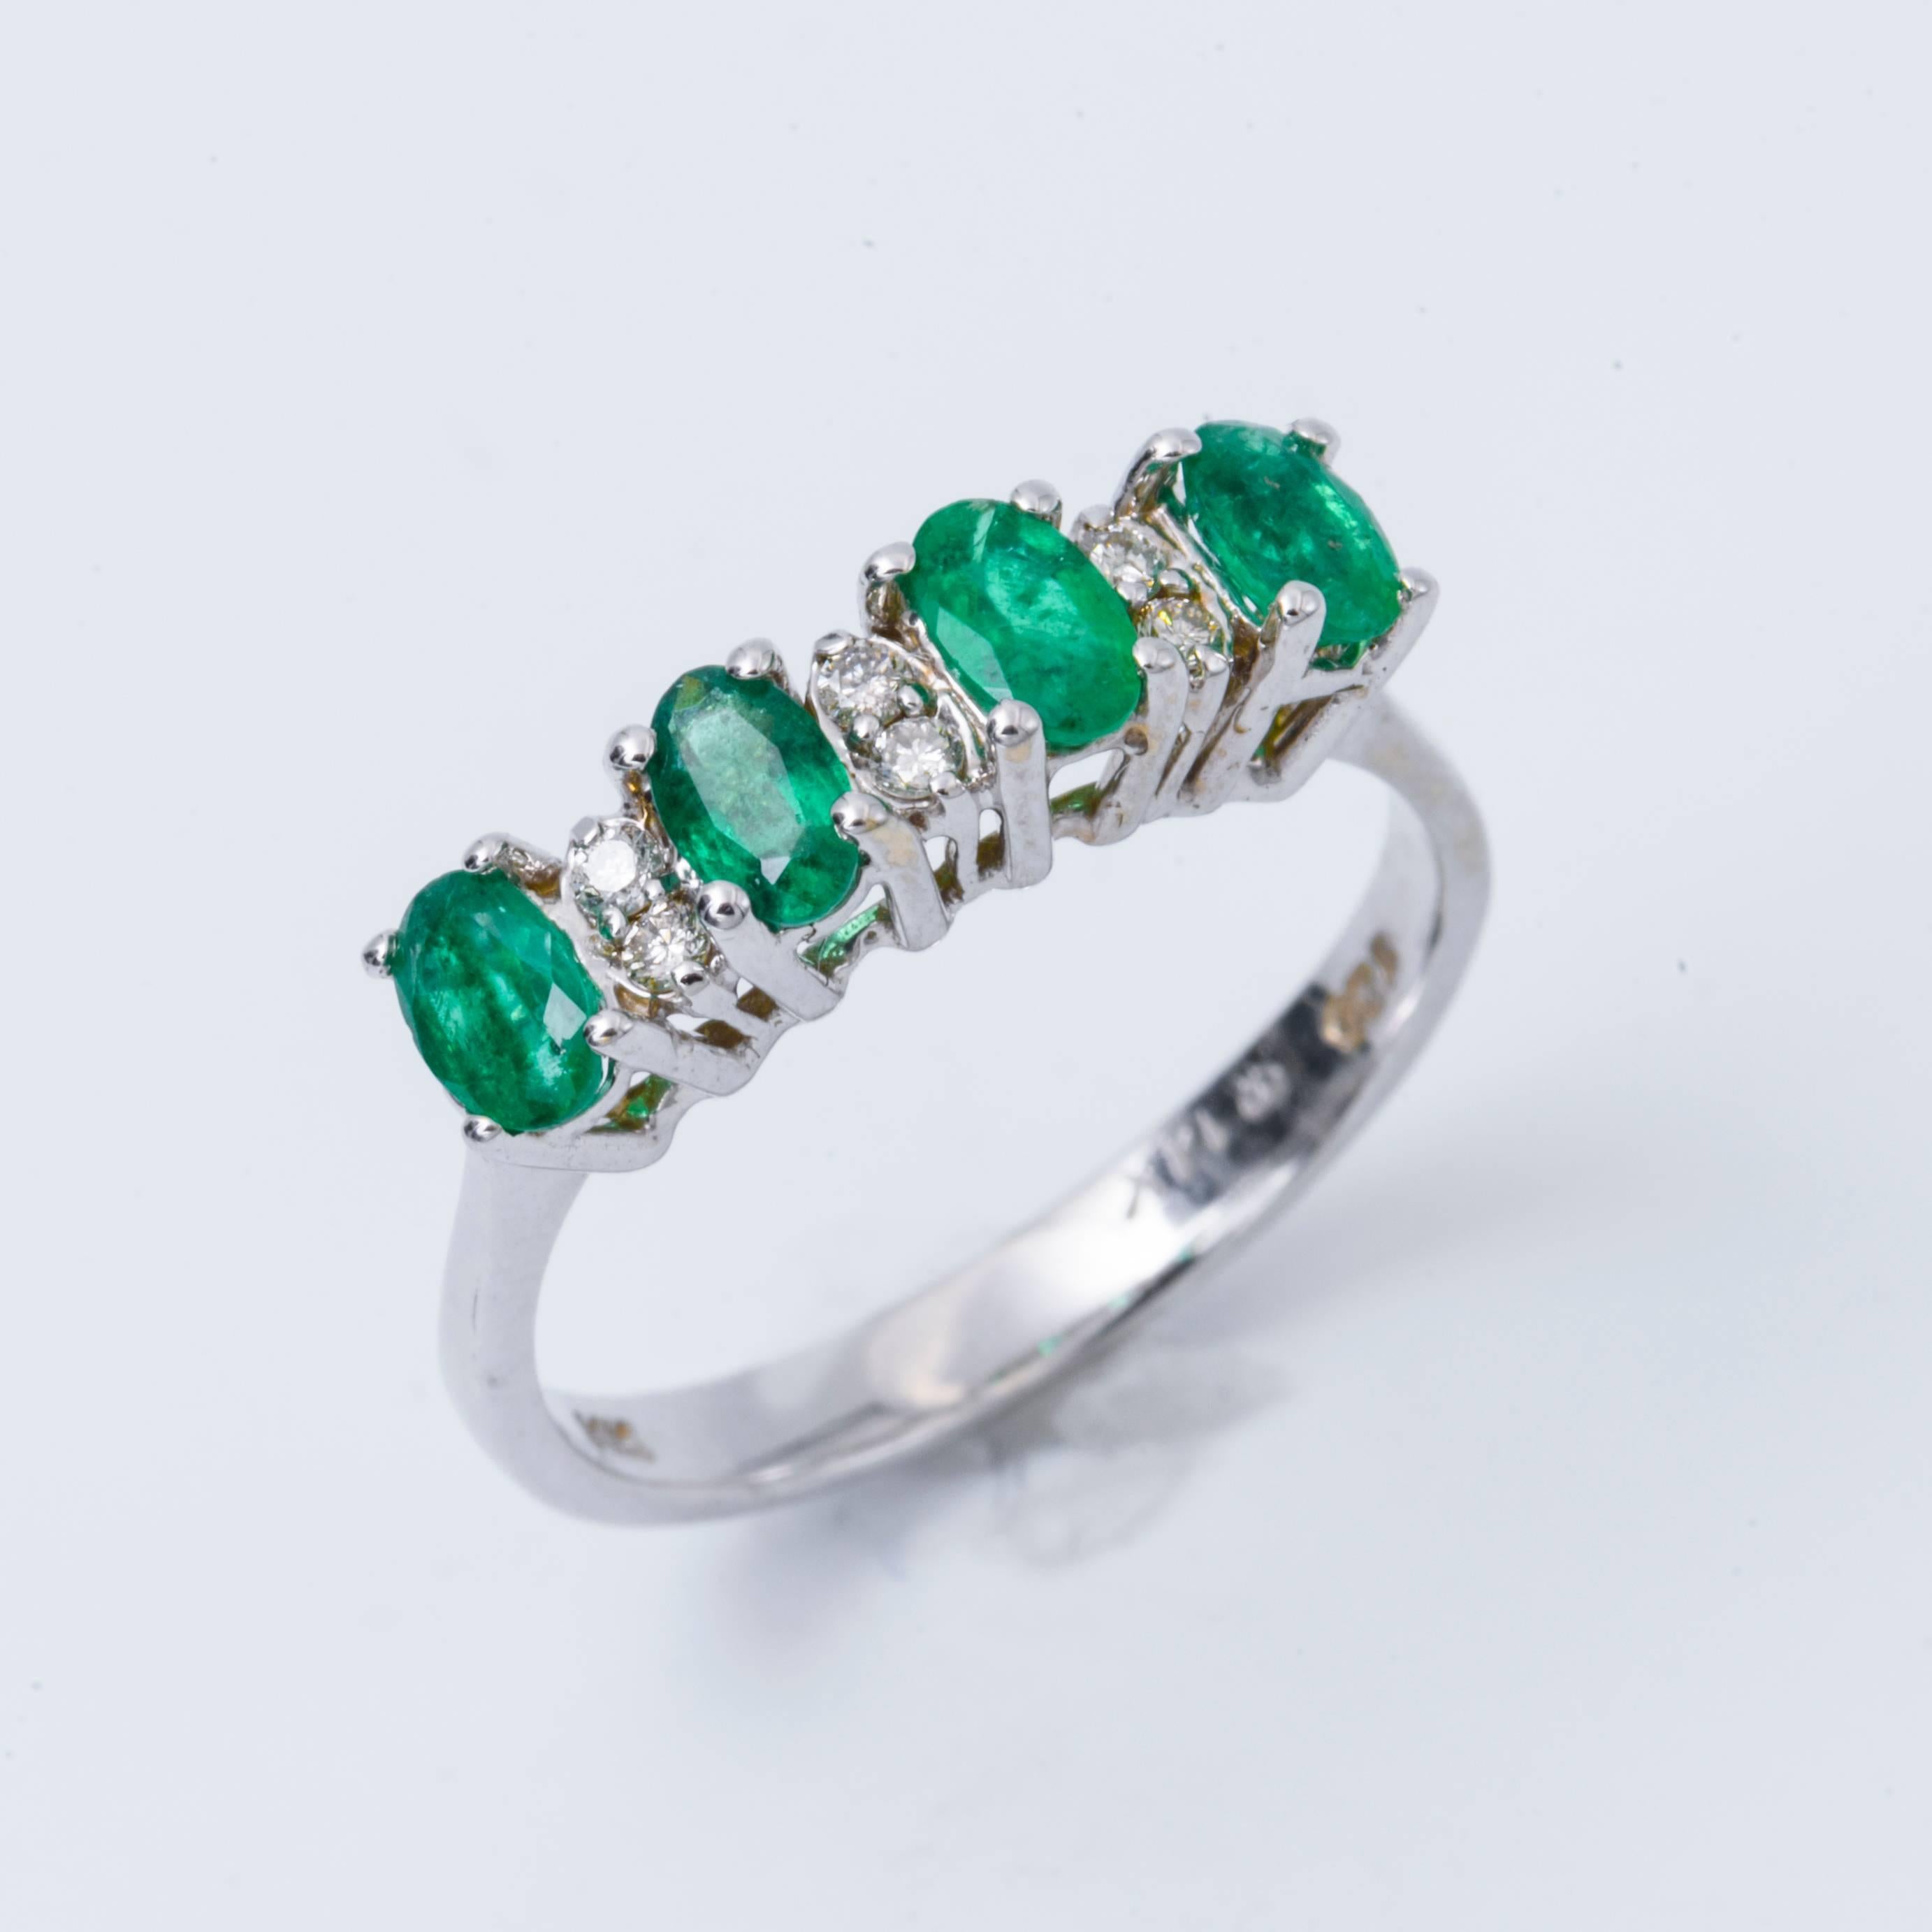 Style: 14k White Gold  Oval Shape Emeralds   Diamond  Band Engagement Ring
Material: 14k White  Gold
Gemstone Details: Each Oval Shape Emerald approximately . 5x3 mm for a total Weight of 0.88 Cts.
Diamond Details: Approximately 0.09 ctw of